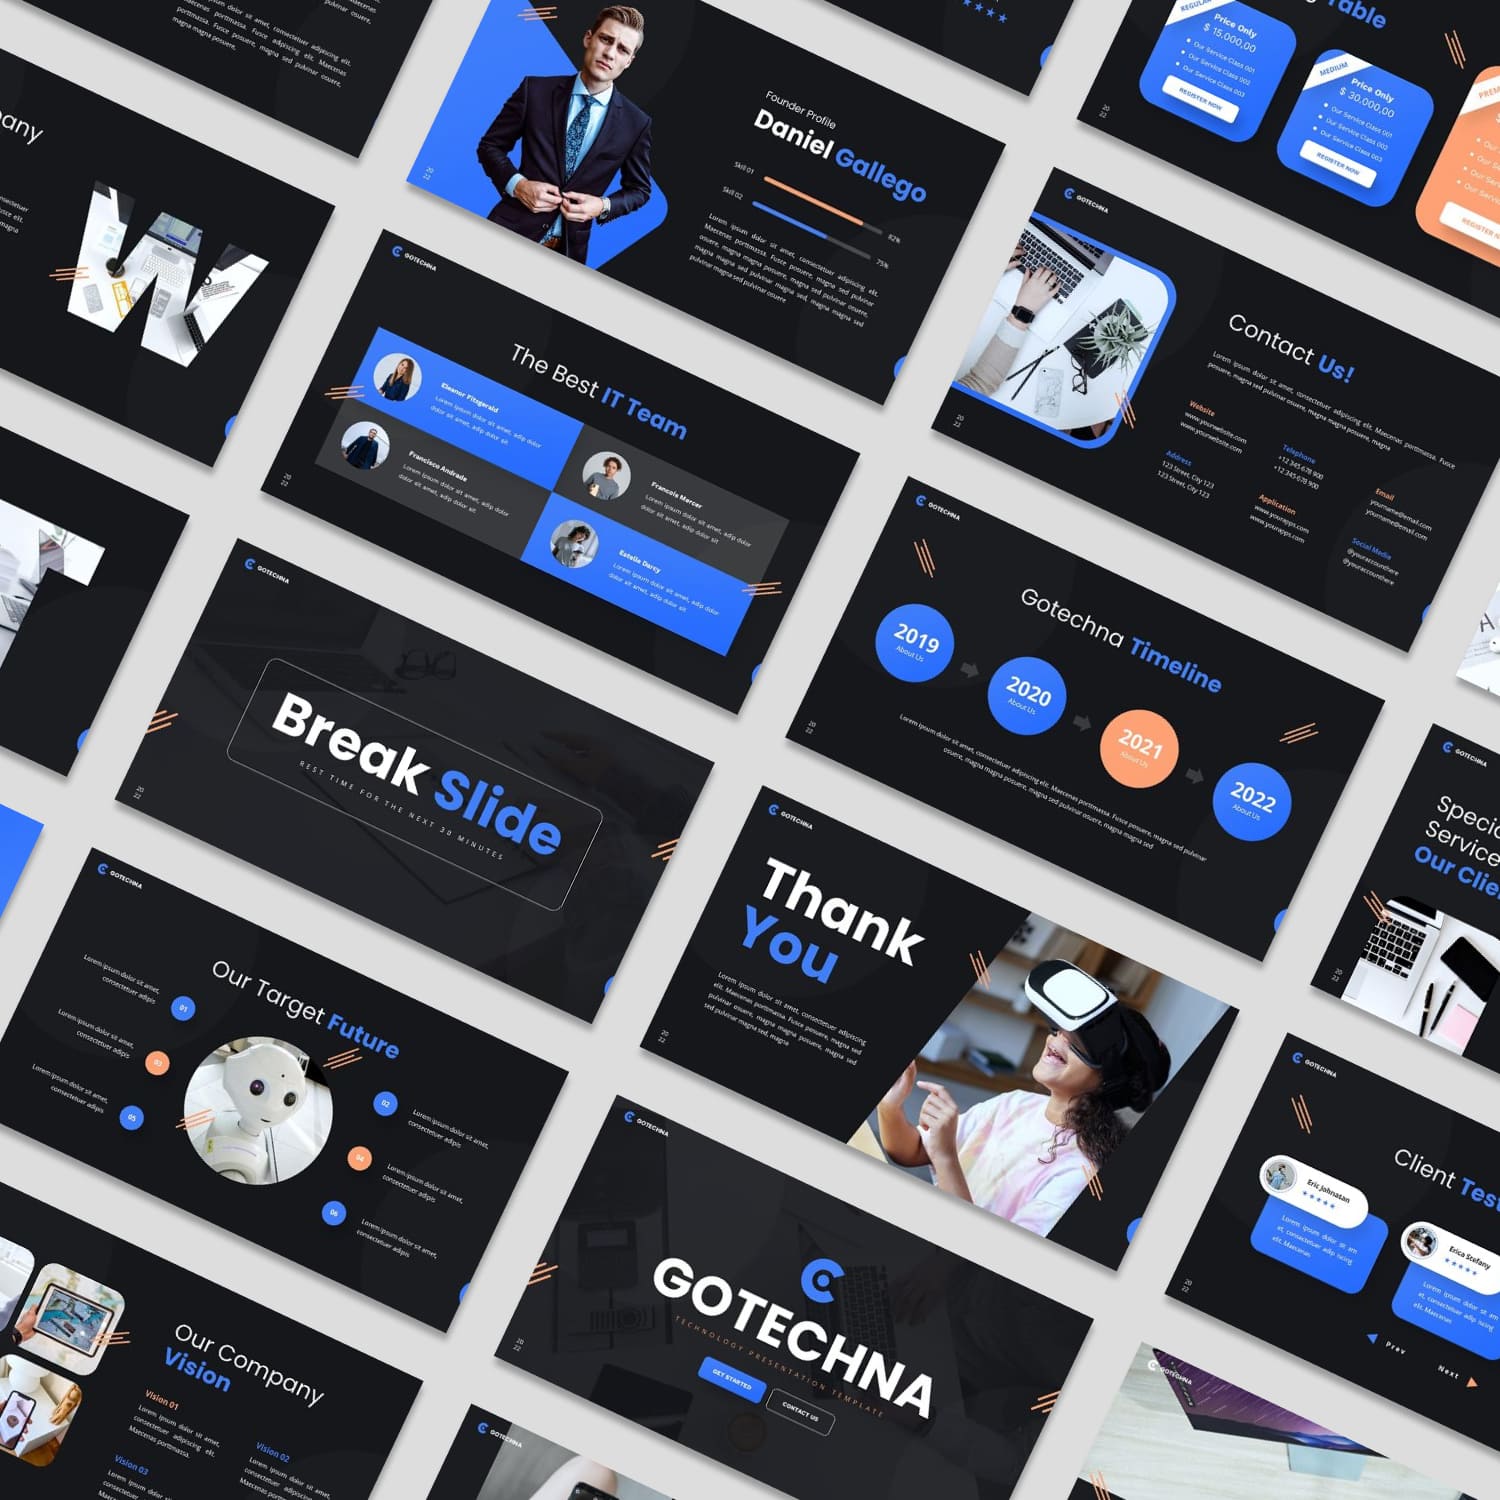 Gotechna - Powerpoint Template cover.